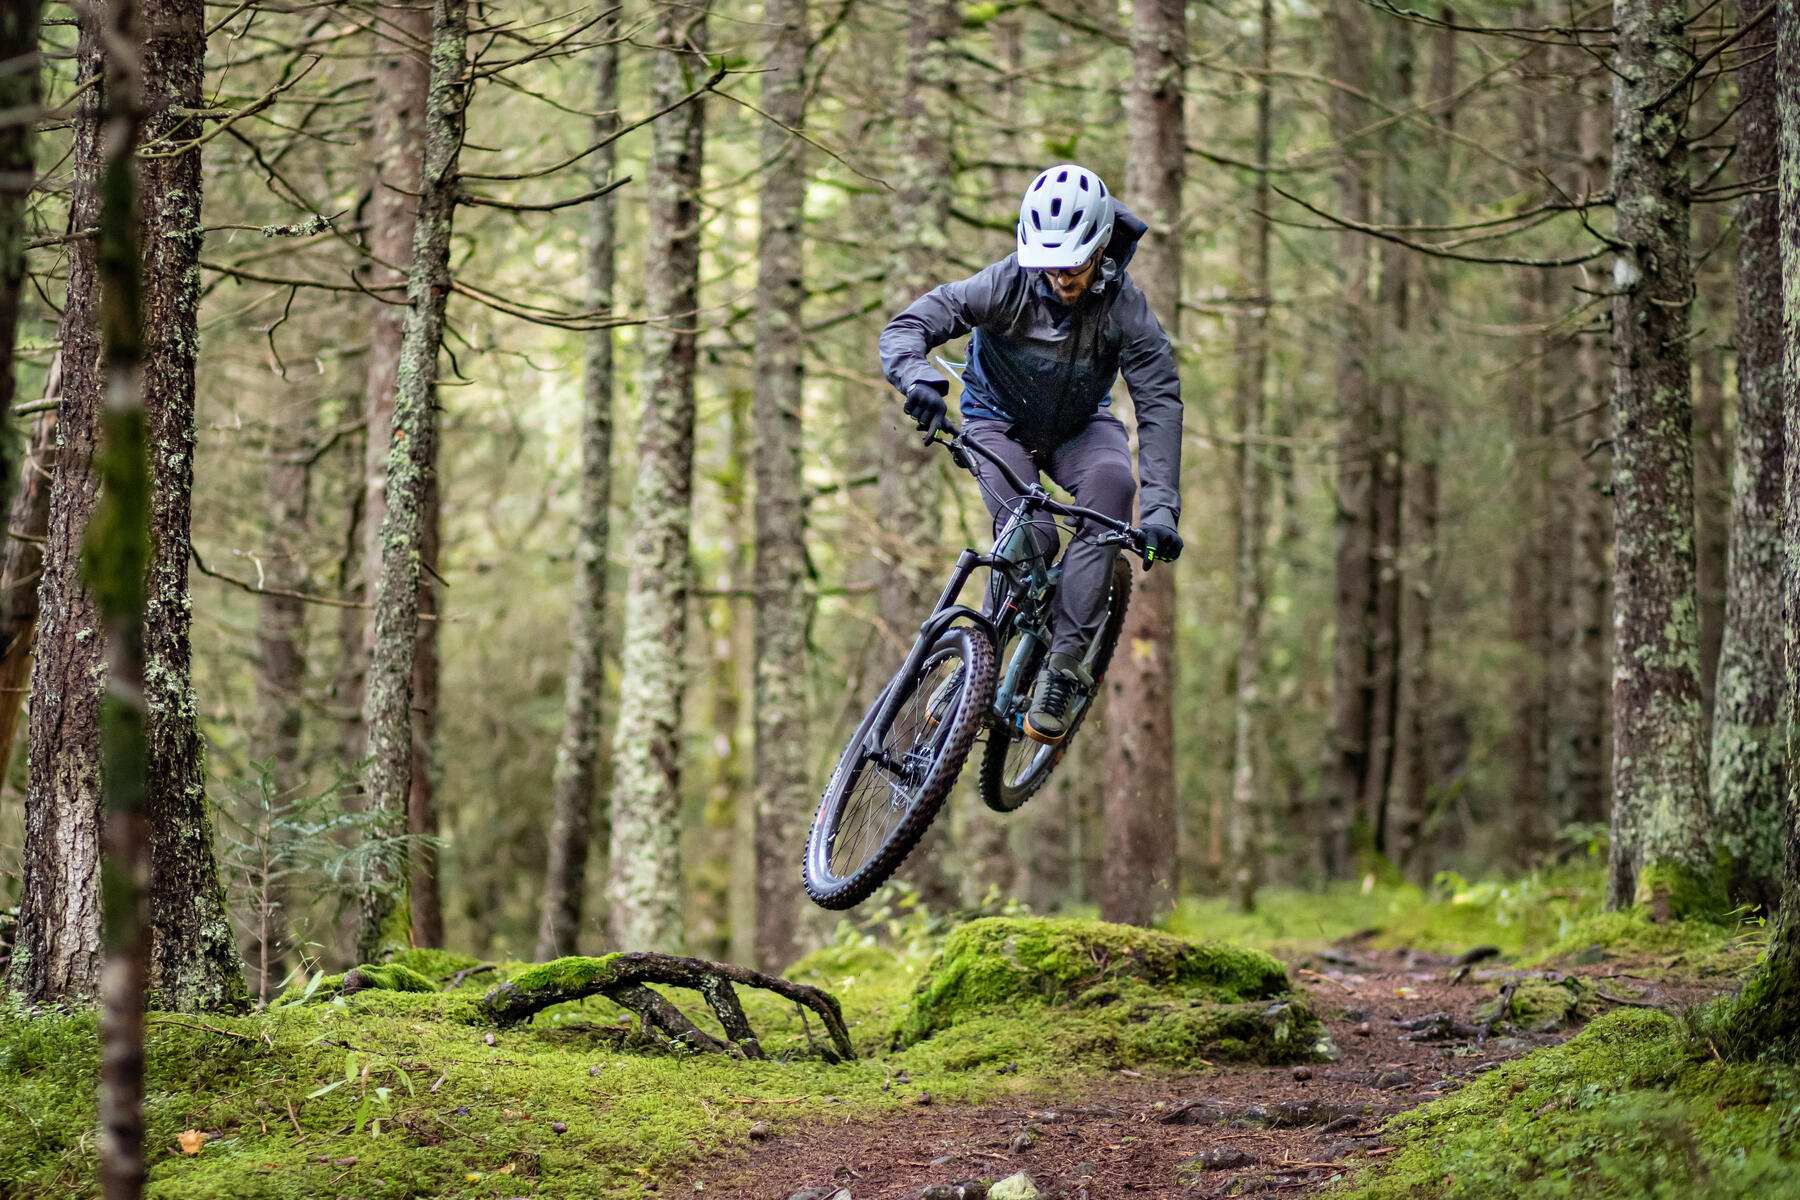 How To Choose a Mountain Bike : What Size Do I Need